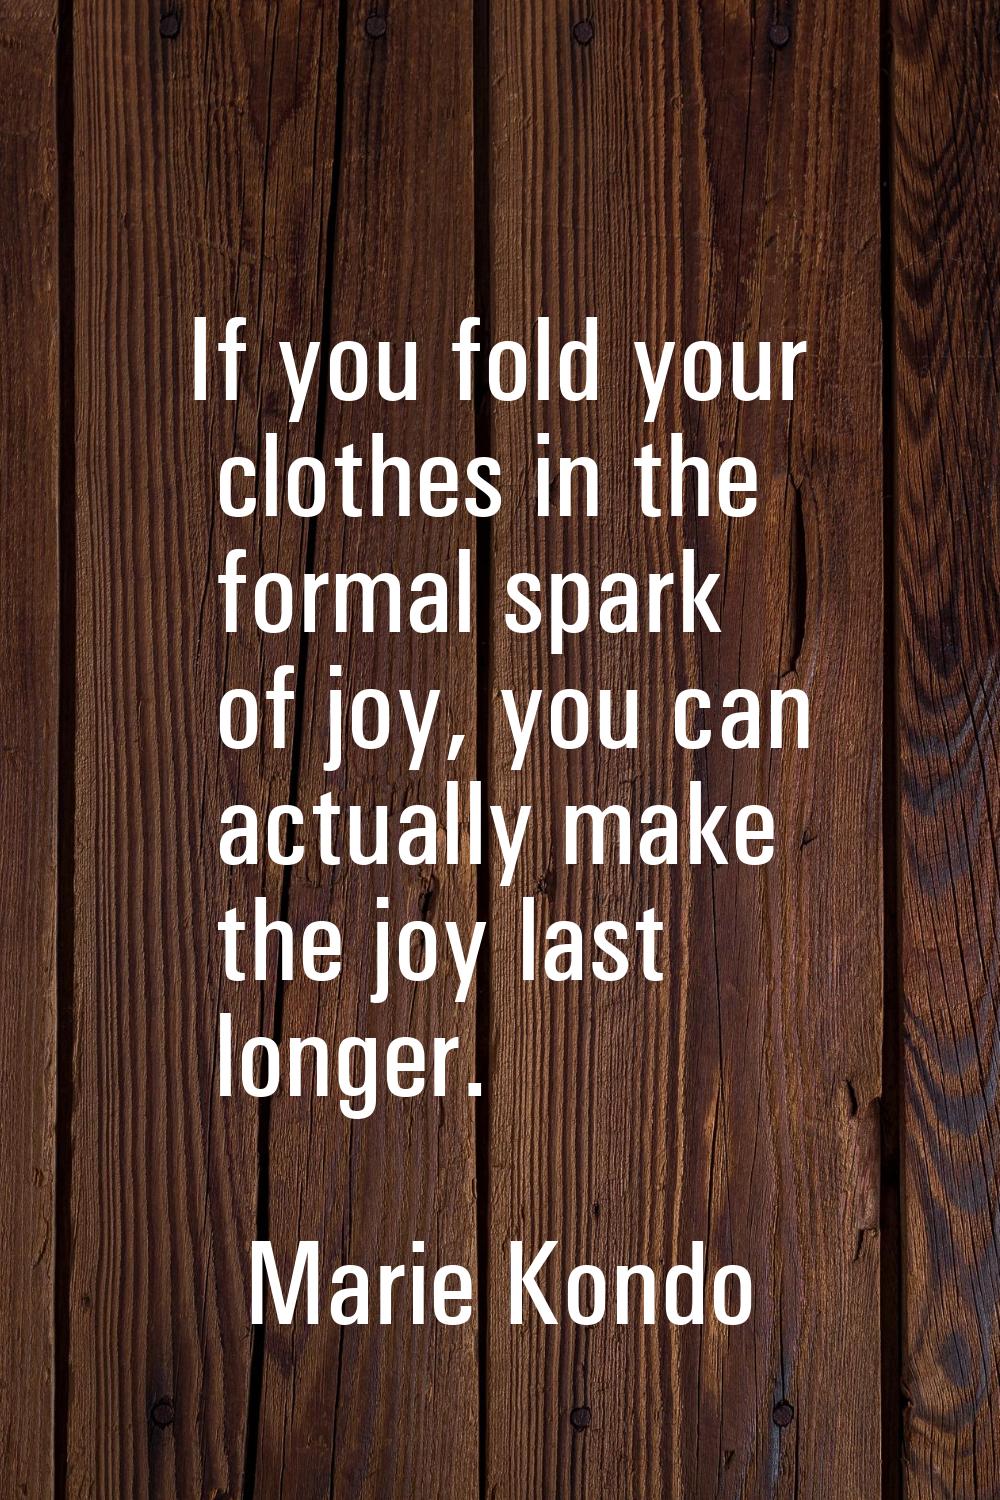 If you fold your clothes in the formal spark of joy, you can actually make the joy last longer.